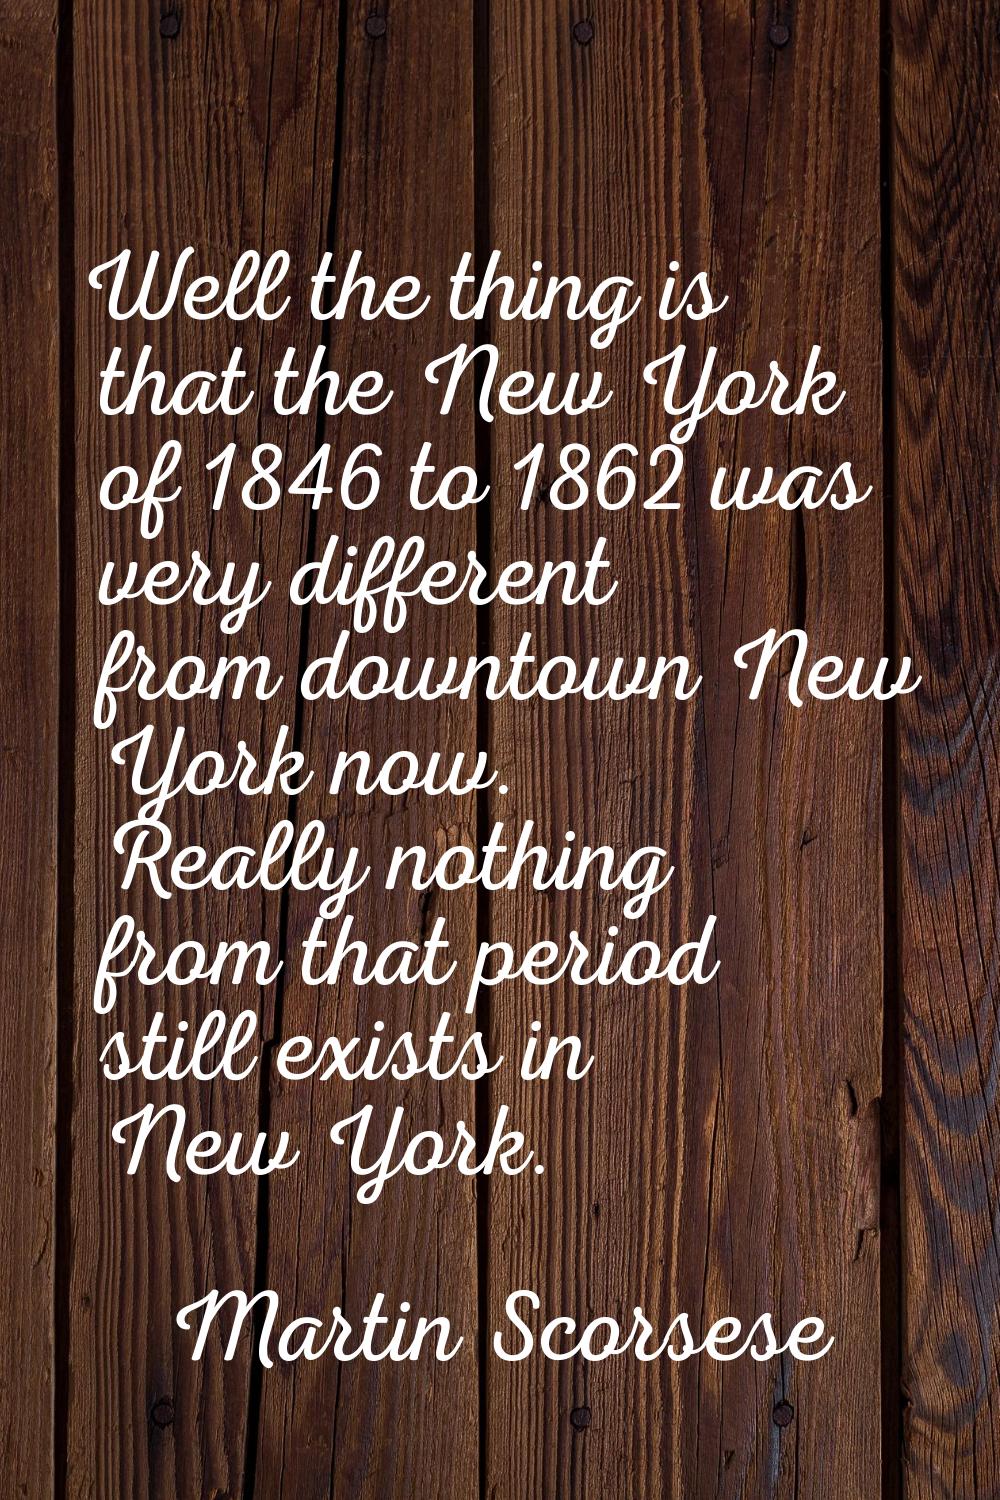 Well the thing is that the New York of 1846 to 1862 was very different from downtown New York now. 